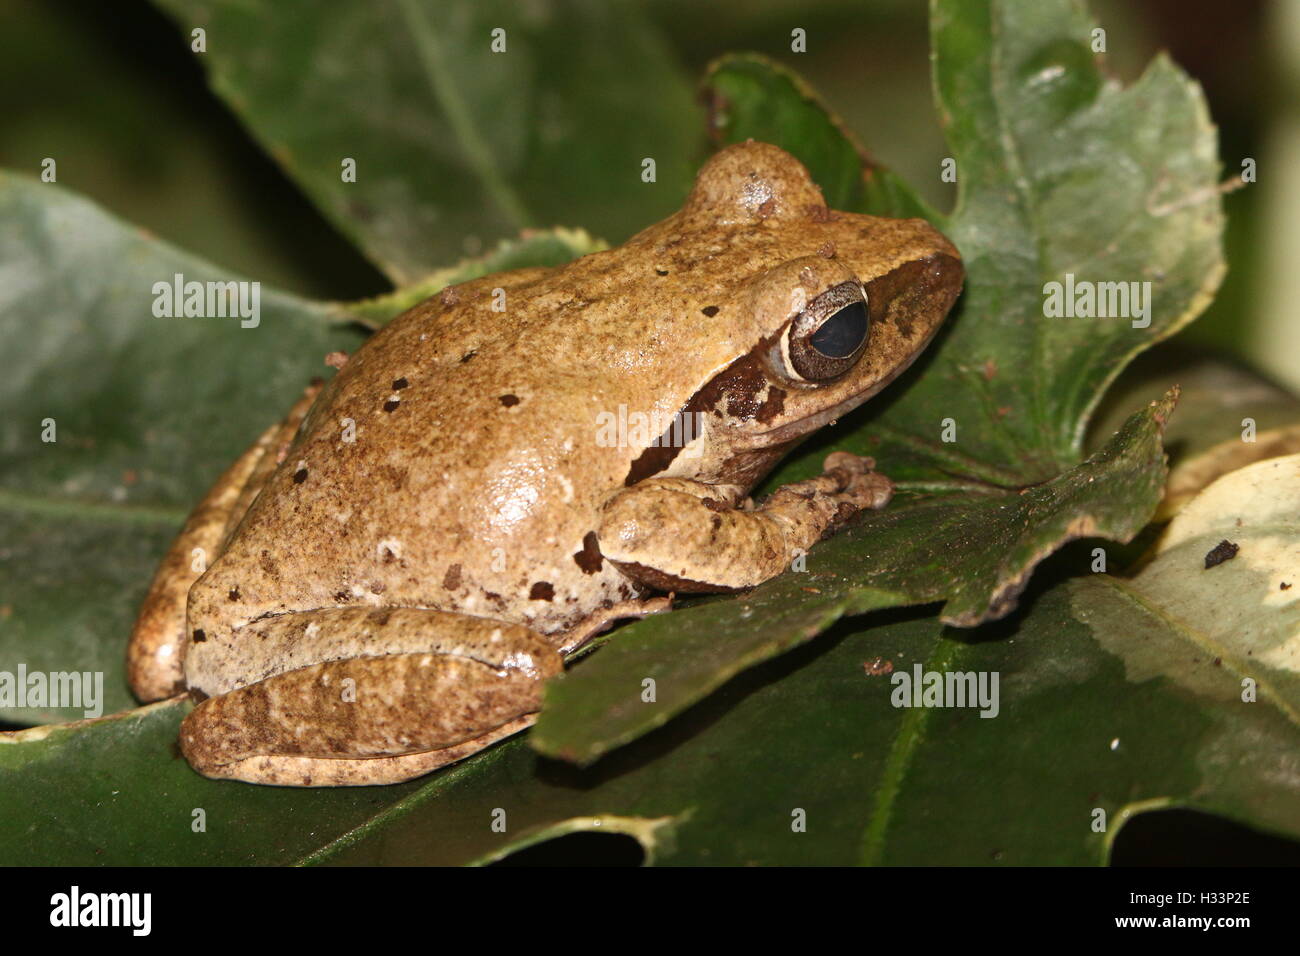 Asian Common Tree Frog or Four-lined tree frog (Polypedates leucomystax), aka Golden Gliding Frog or Flying Leopard Frog Stock Photo